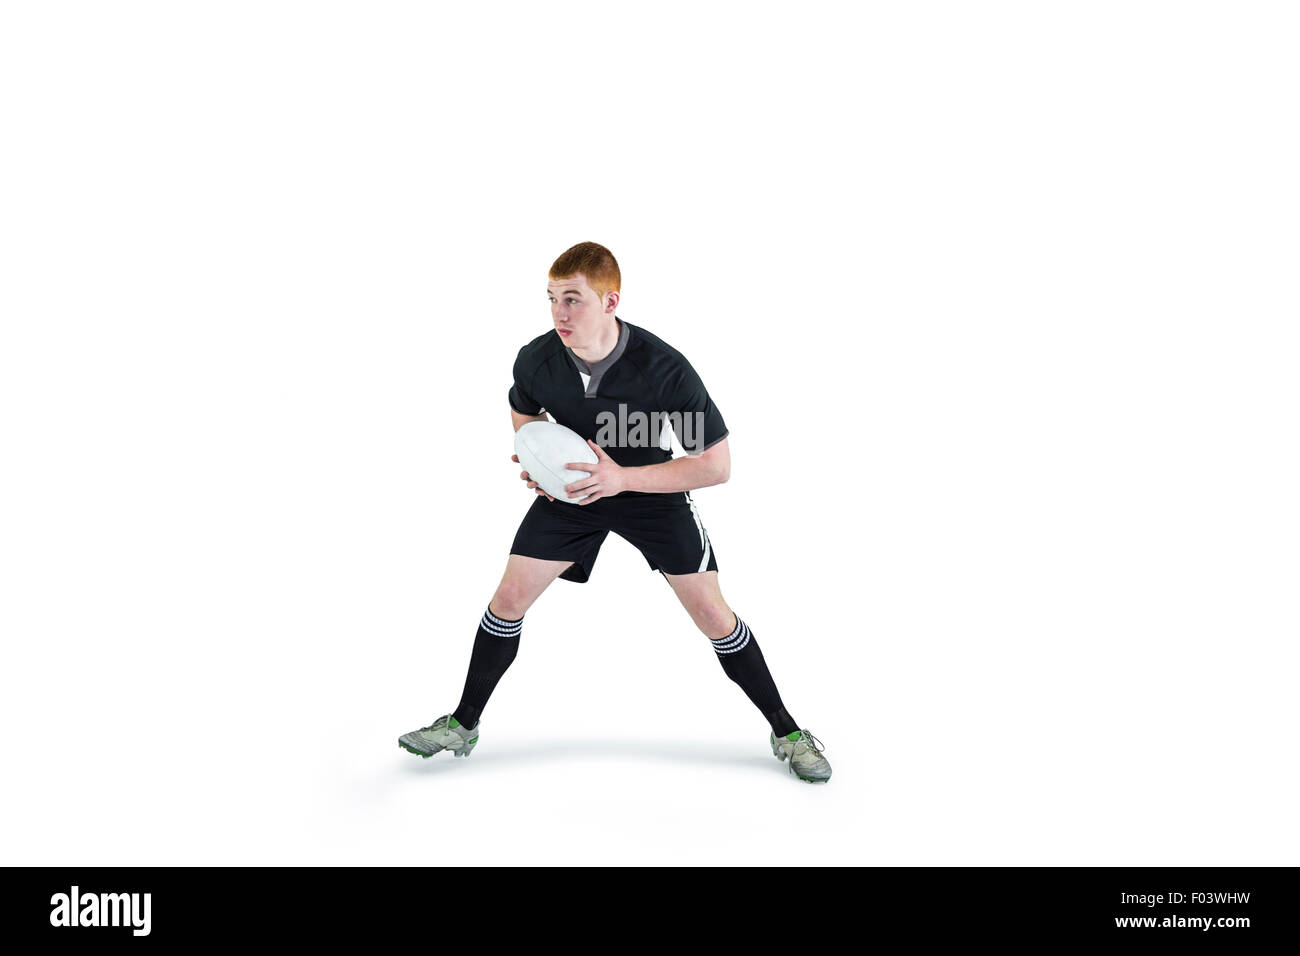 Rugby player running with a rugby ball Stock Photo